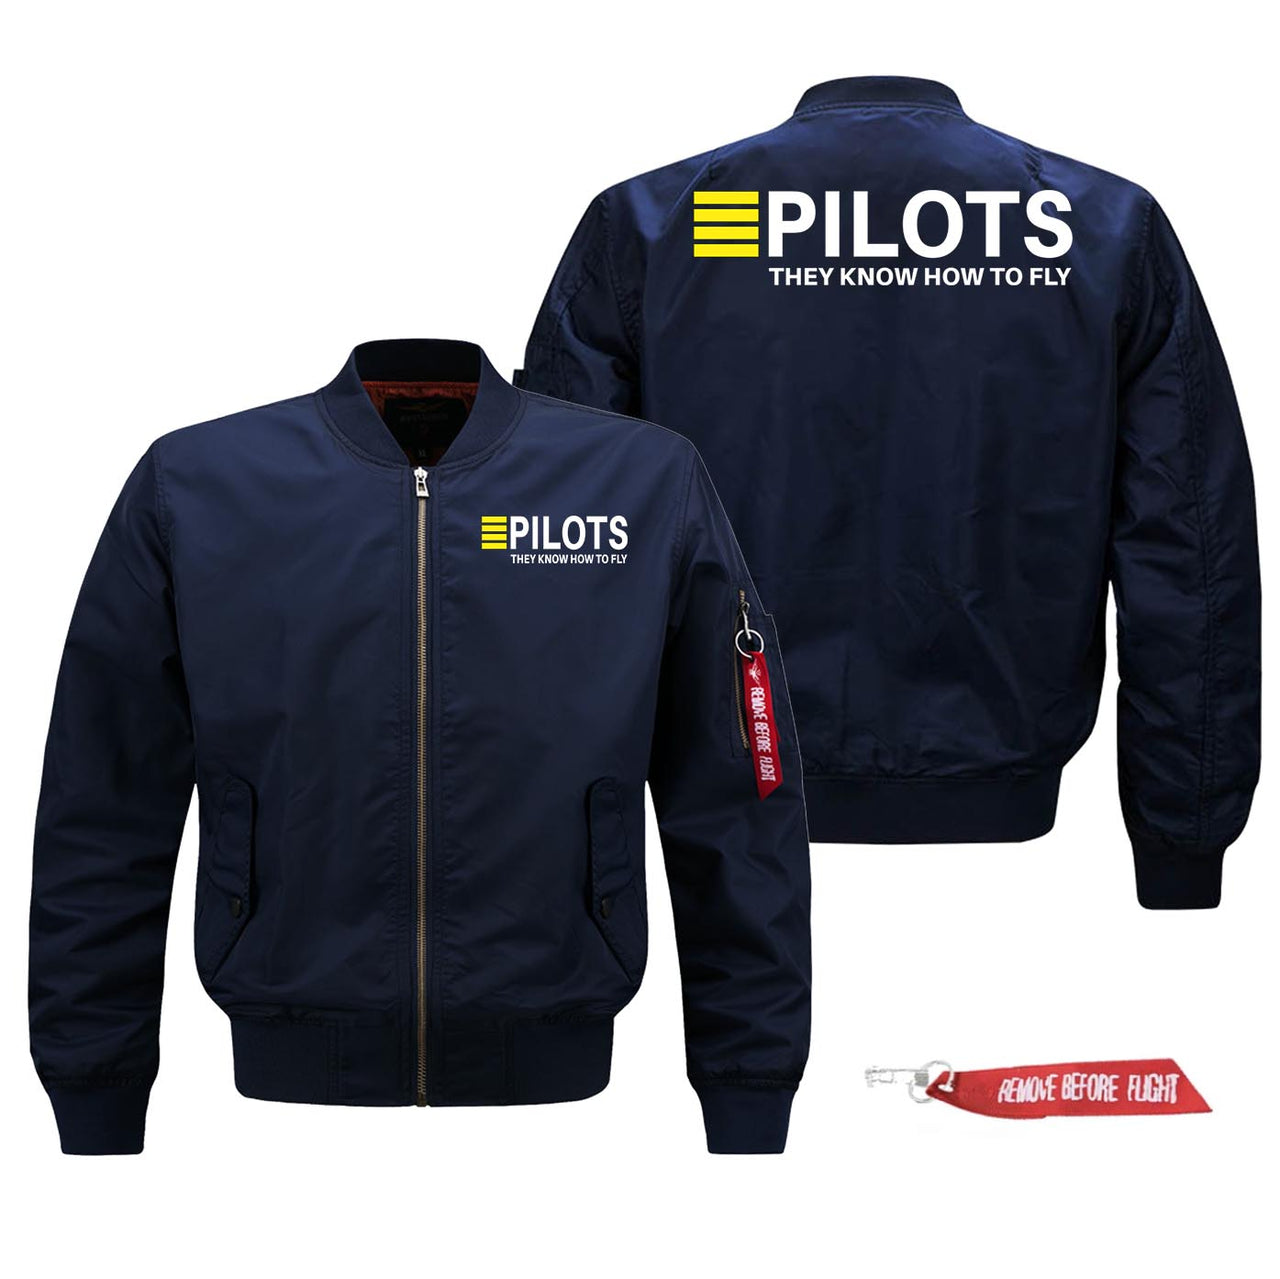 PILOTS They Know How To Fly Designed Pilot Jackets (Customizable)